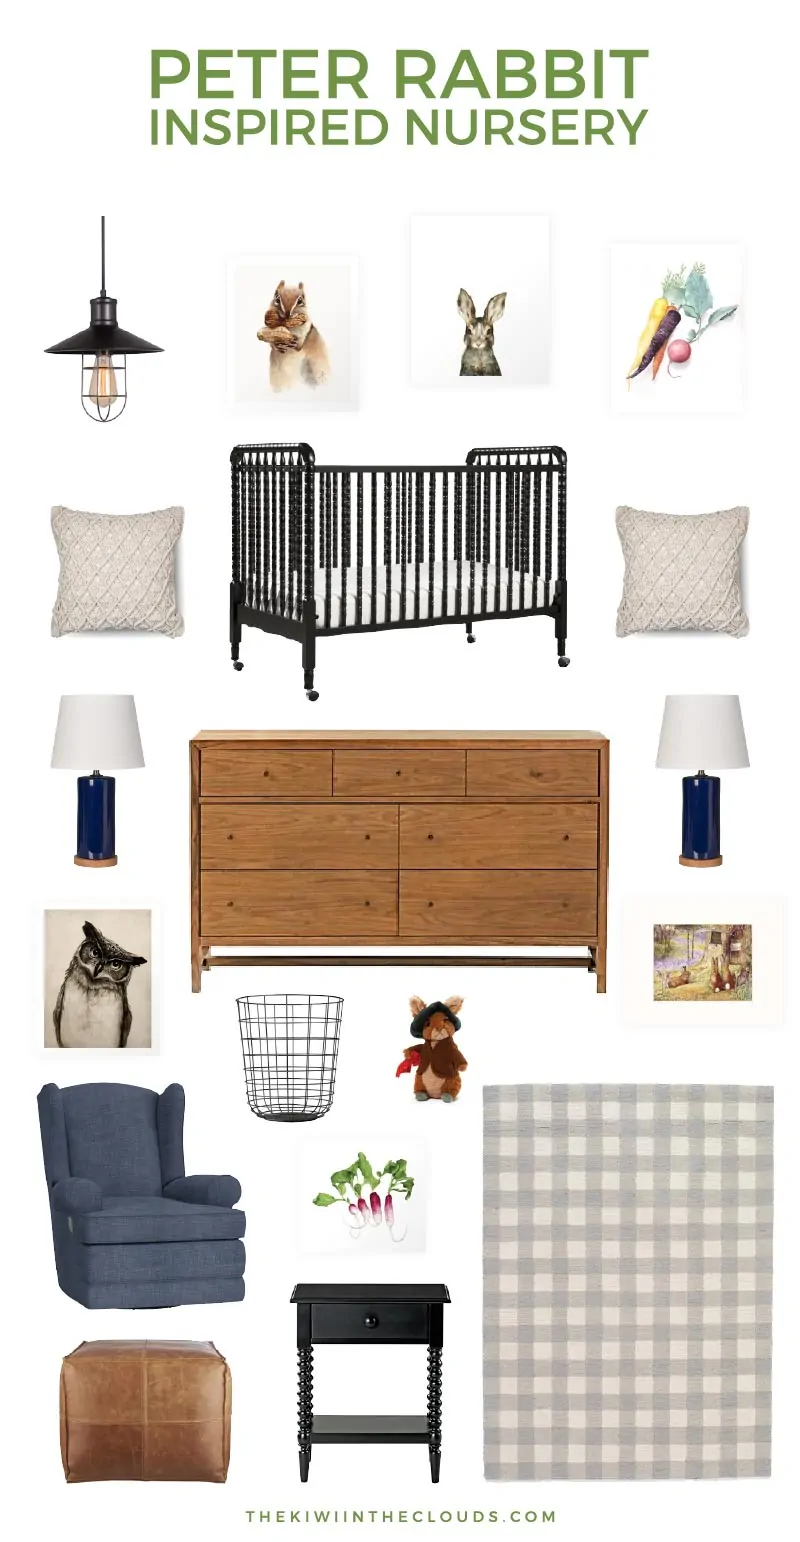 Create a charming Peter Rabbit nursery that’s vintage with just enough modern flair to make it the perfect blend of styles. It’s a baby room that any Beatrix Potter fan will love!